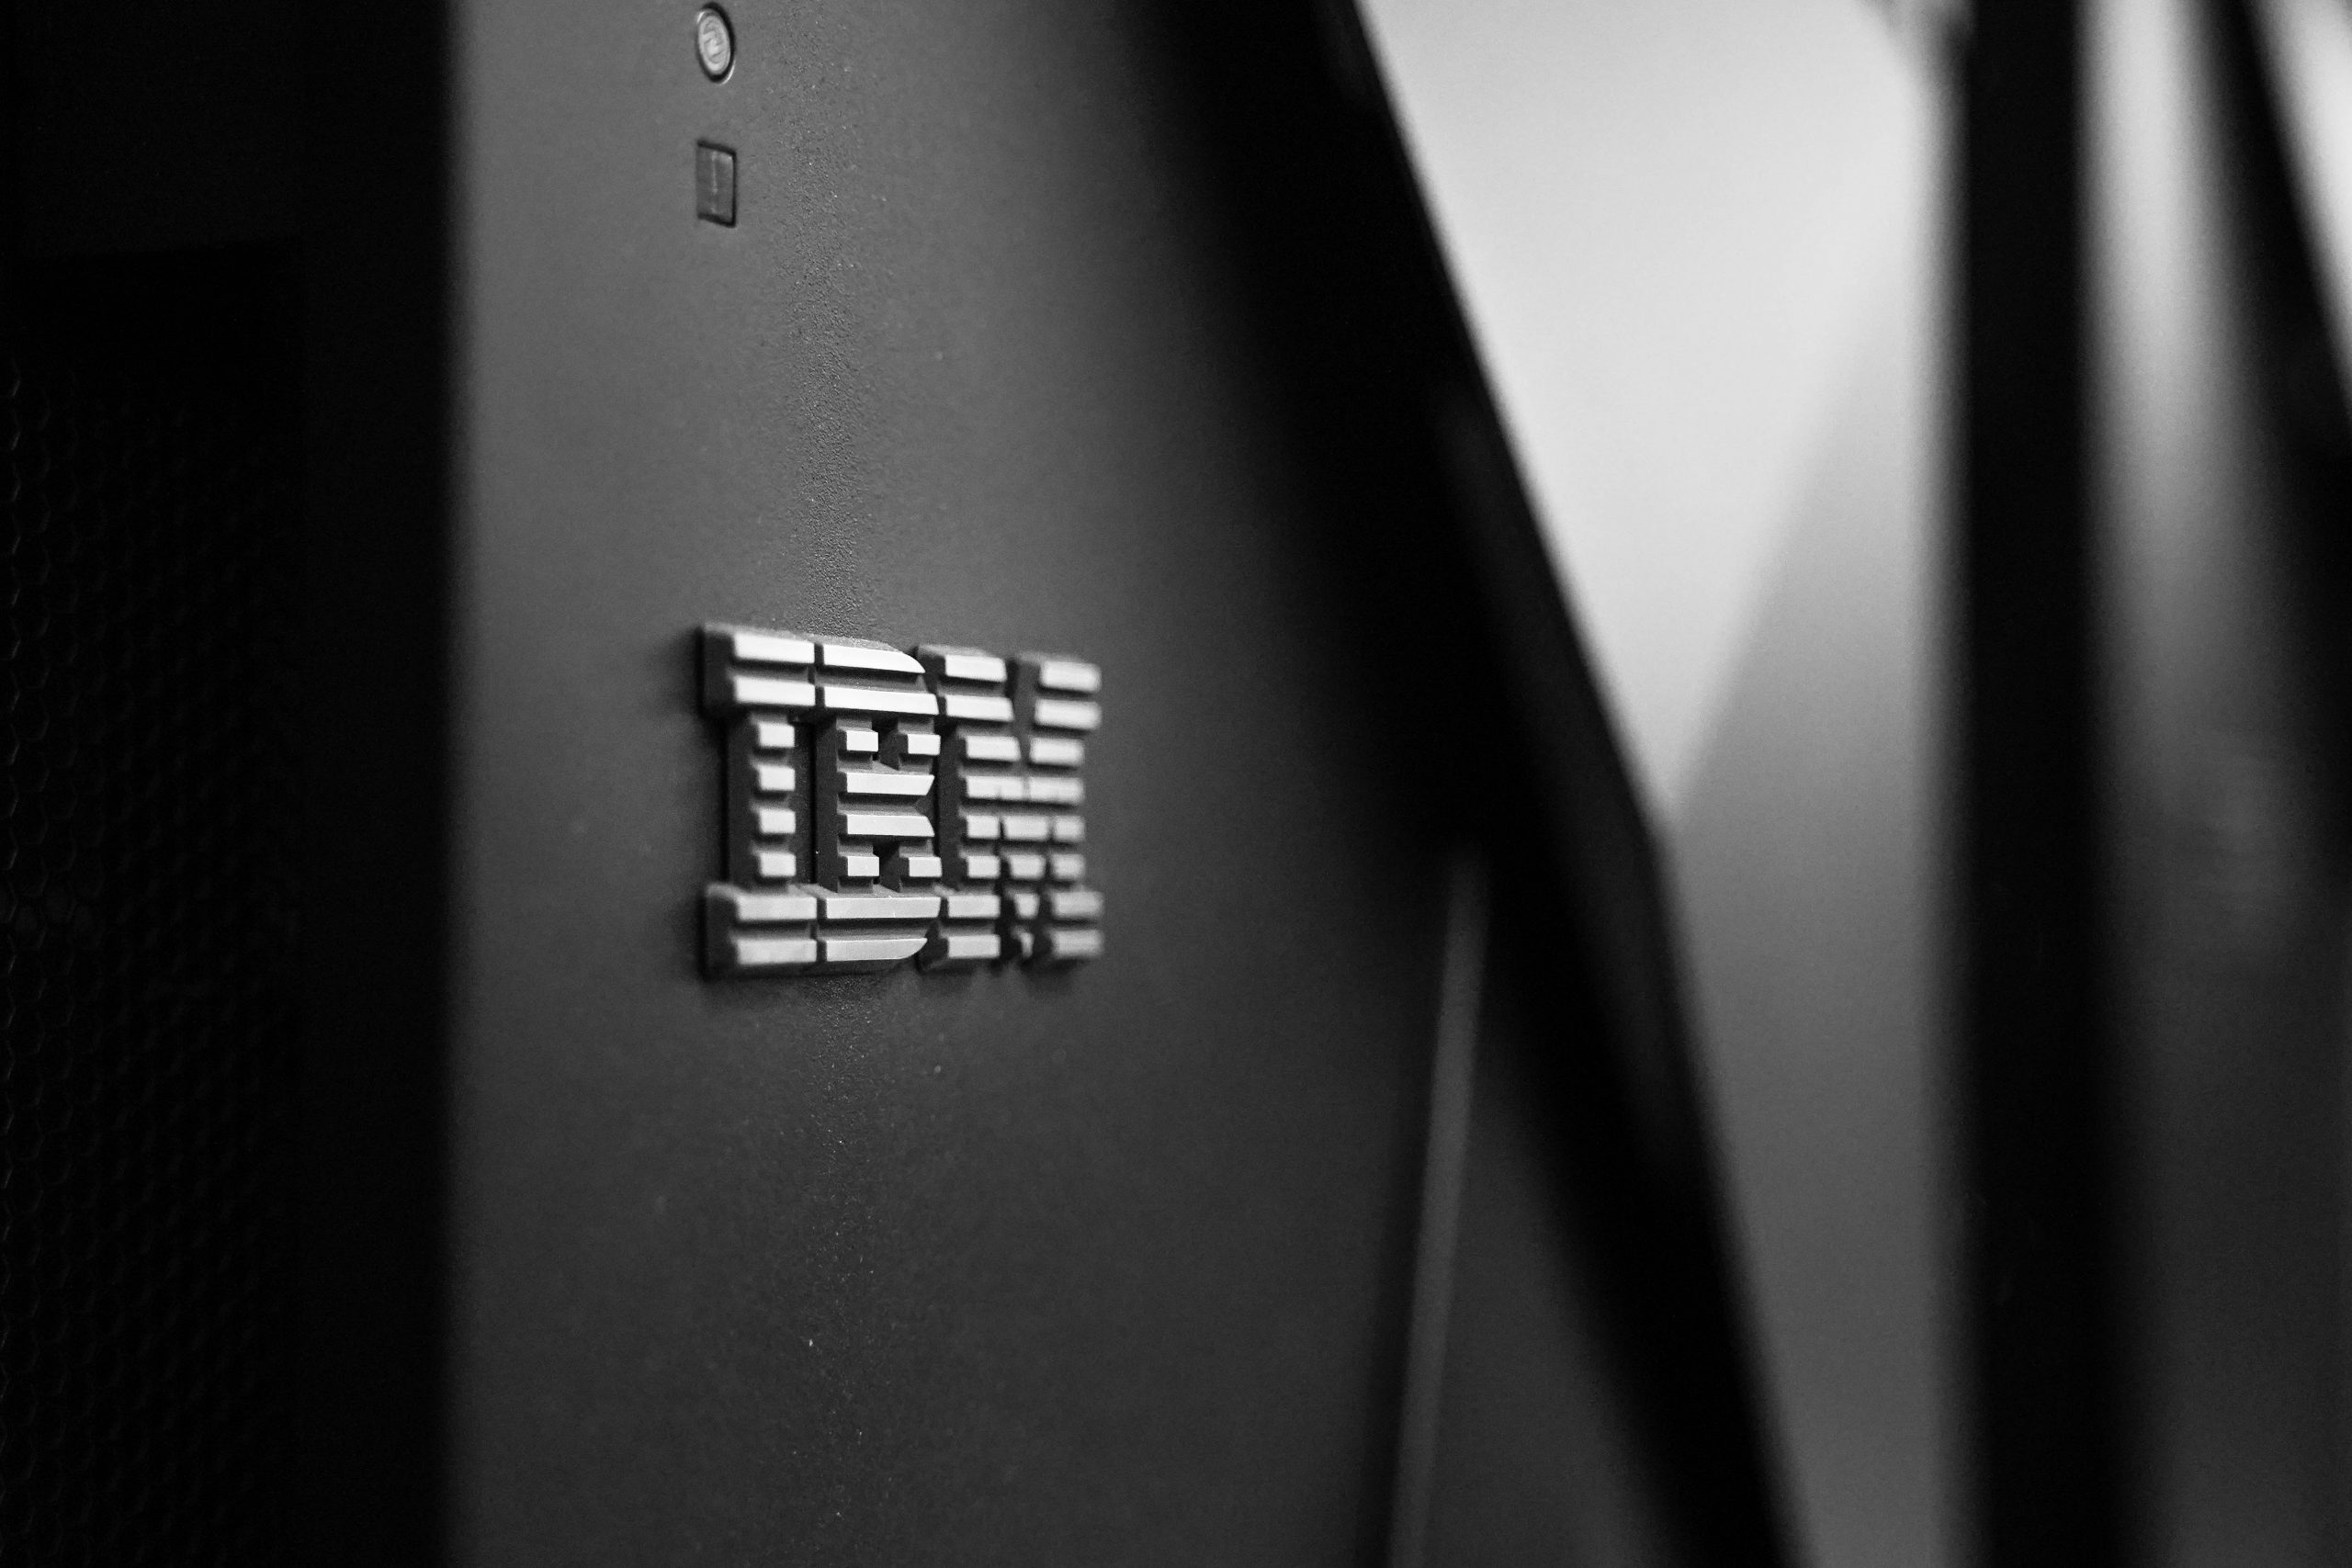 IBM's Q4 Earnings Indicates A Turnaround Story Under New Leadership